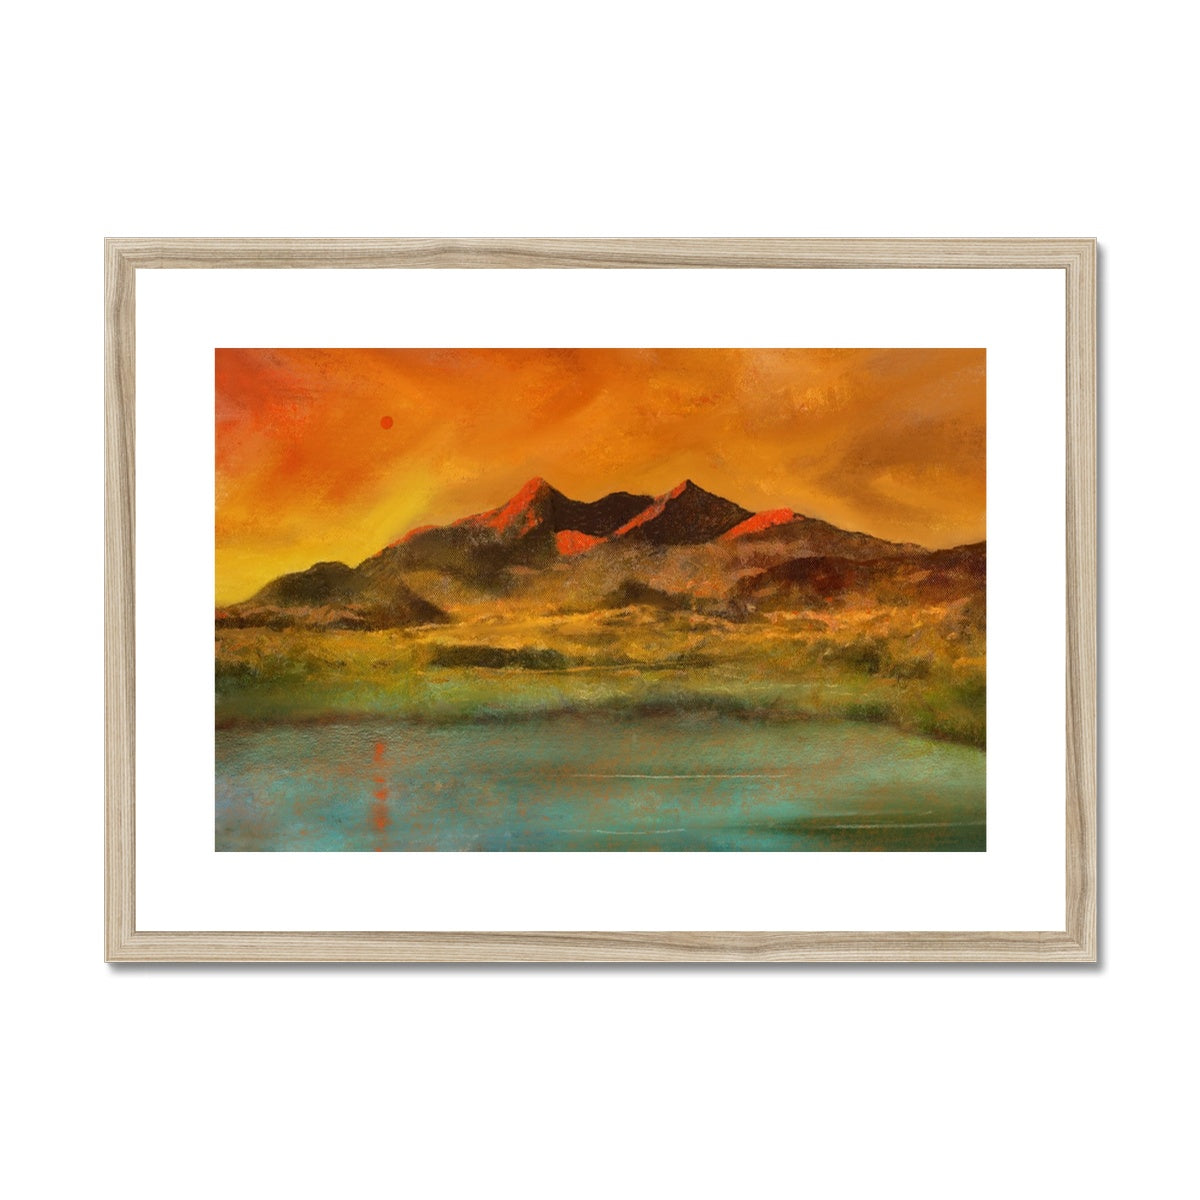 Skye Red Moon Cuillin Painting | Framed & Mounted Prints From Scotland-Framed & Mounted Prints-Skye Art Gallery-A2 Landscape-Natural Frame-Paintings, Prints, Homeware, Art Gifts From Scotland By Scottish Artist Kevin Hunter